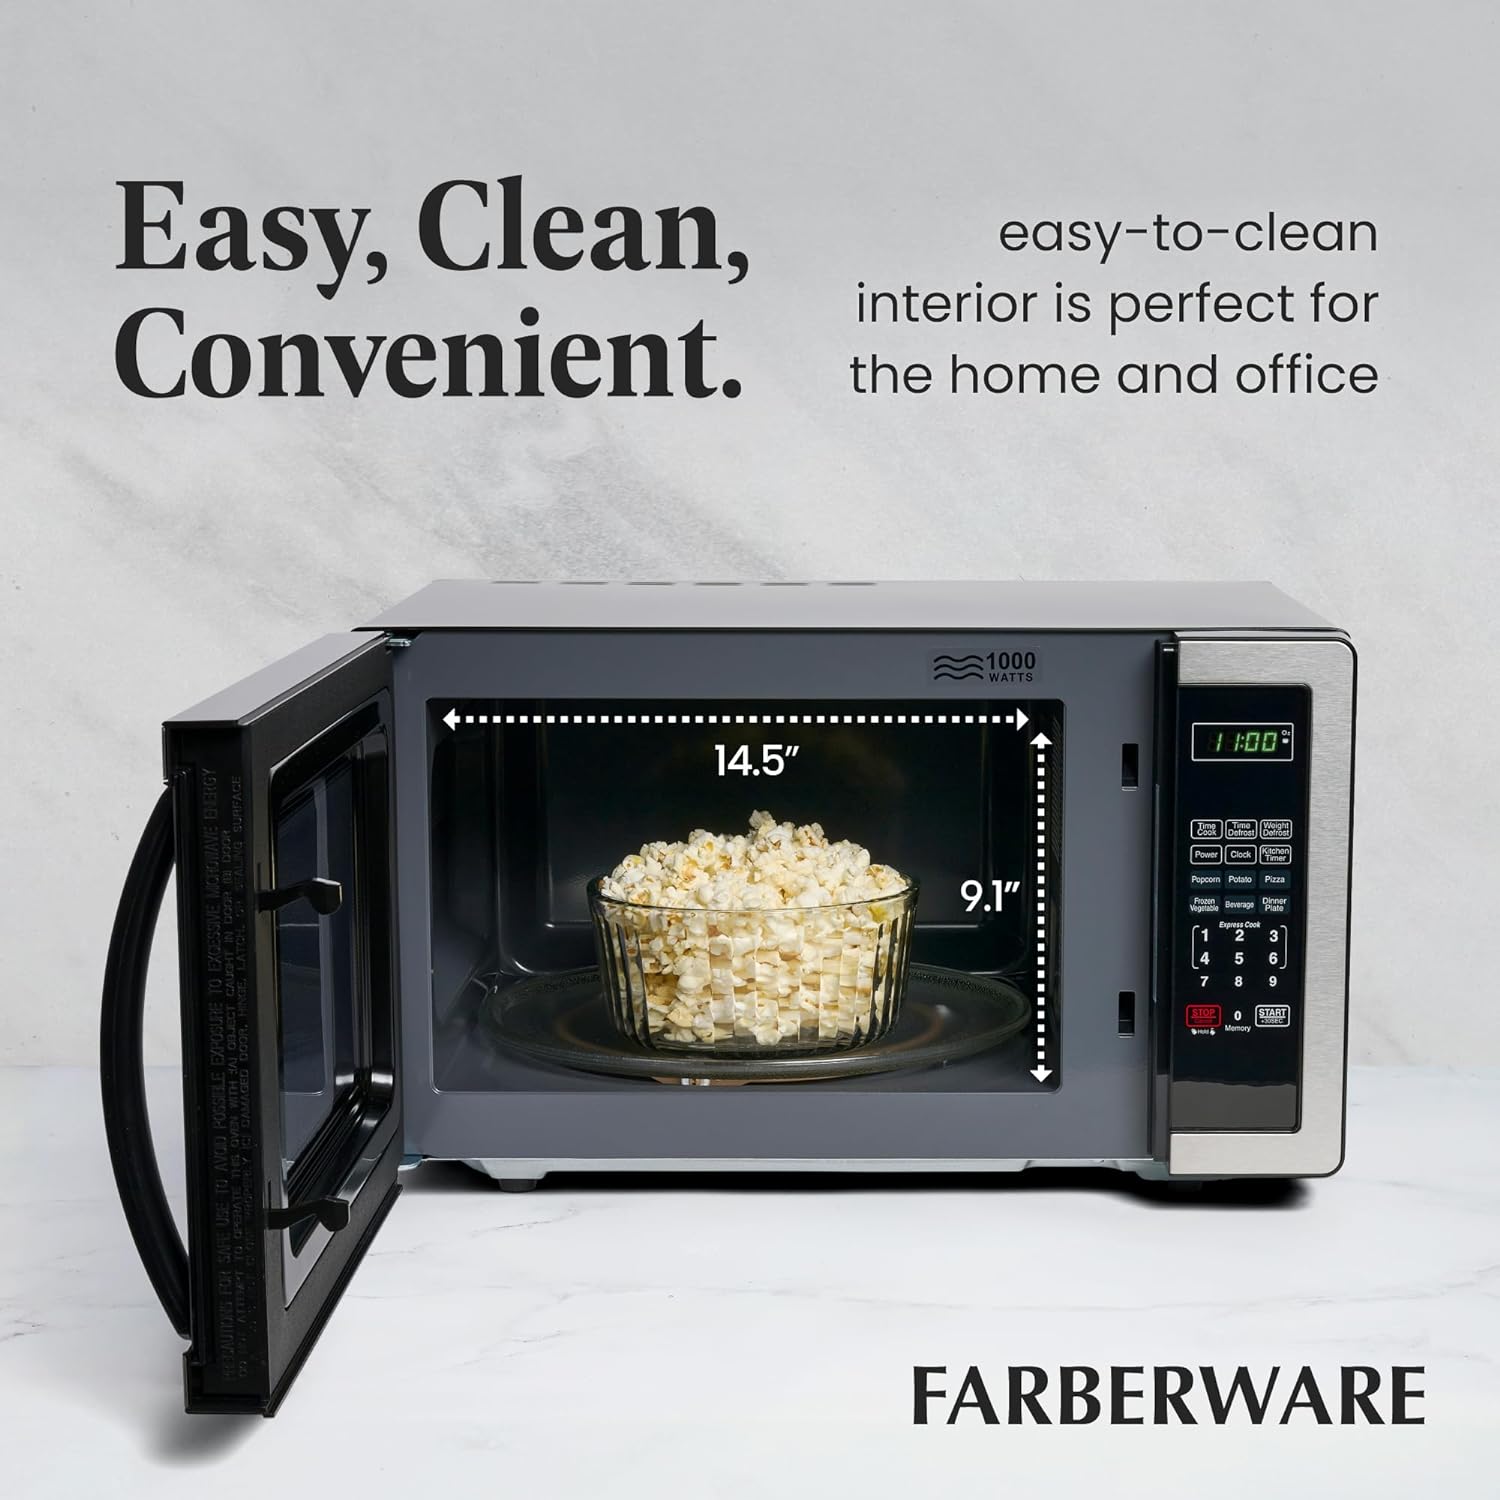 Farberware Stainless Steel Countertop Microwave Oven with Child Lock, 1.1 Cu Ft - image 5 of 7